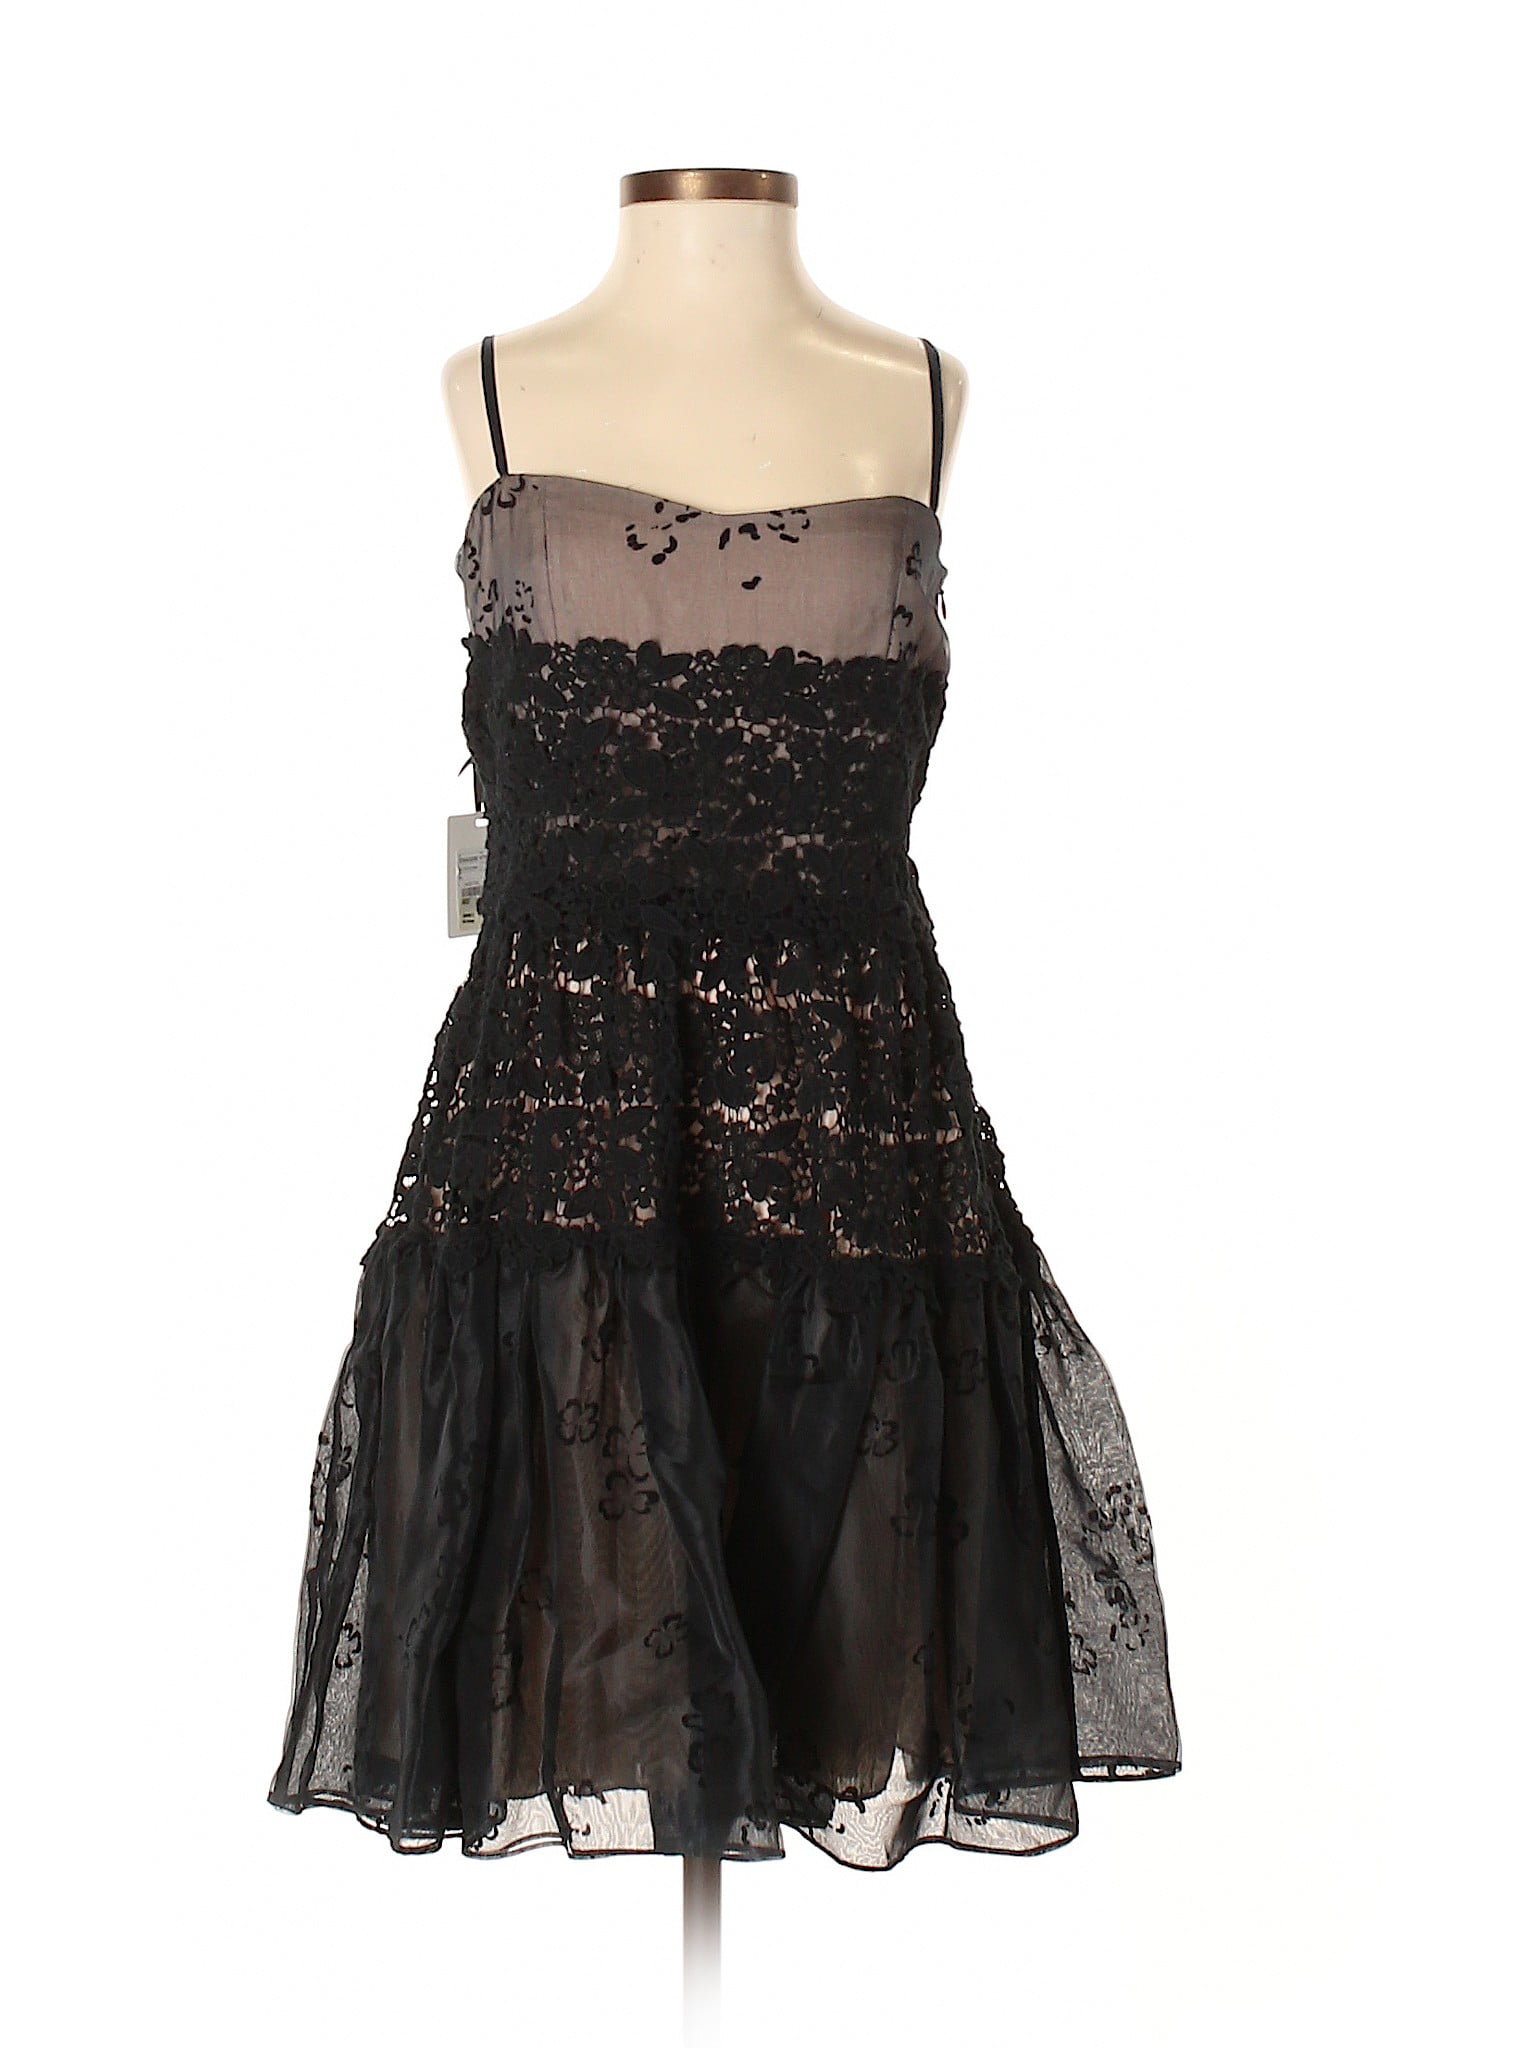 REDValentino - Pre-Owned RED Valentino Women's Size 38 Cocktail Dress ...